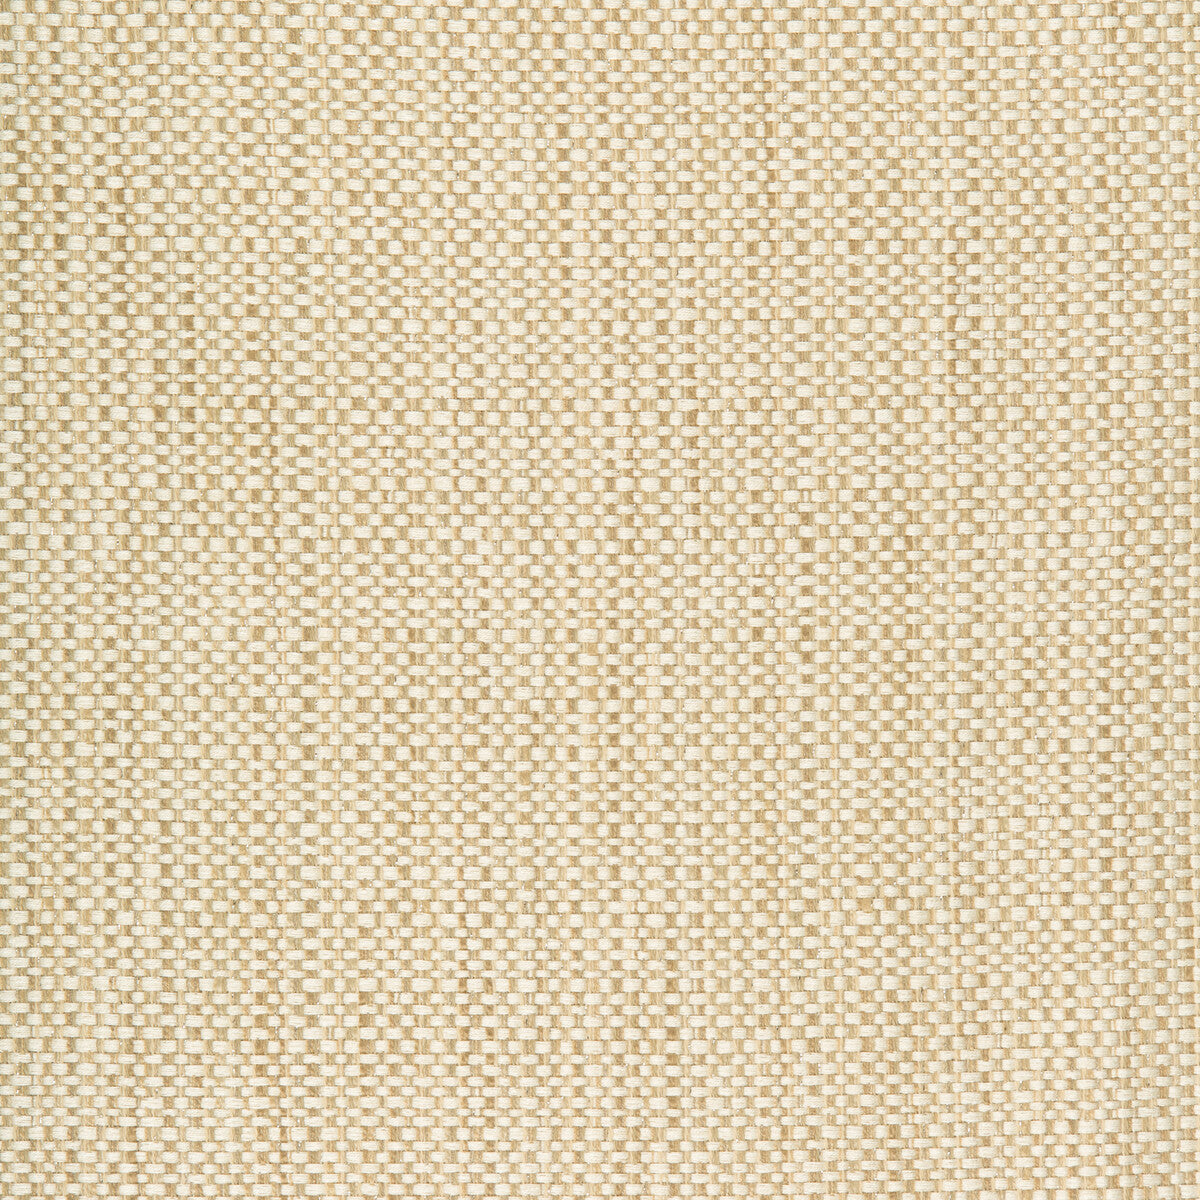 Kravet Design fabric in 34683-416 color - pattern 34683.416.0 - by Kravet Design in the Performance Crypton Home collection